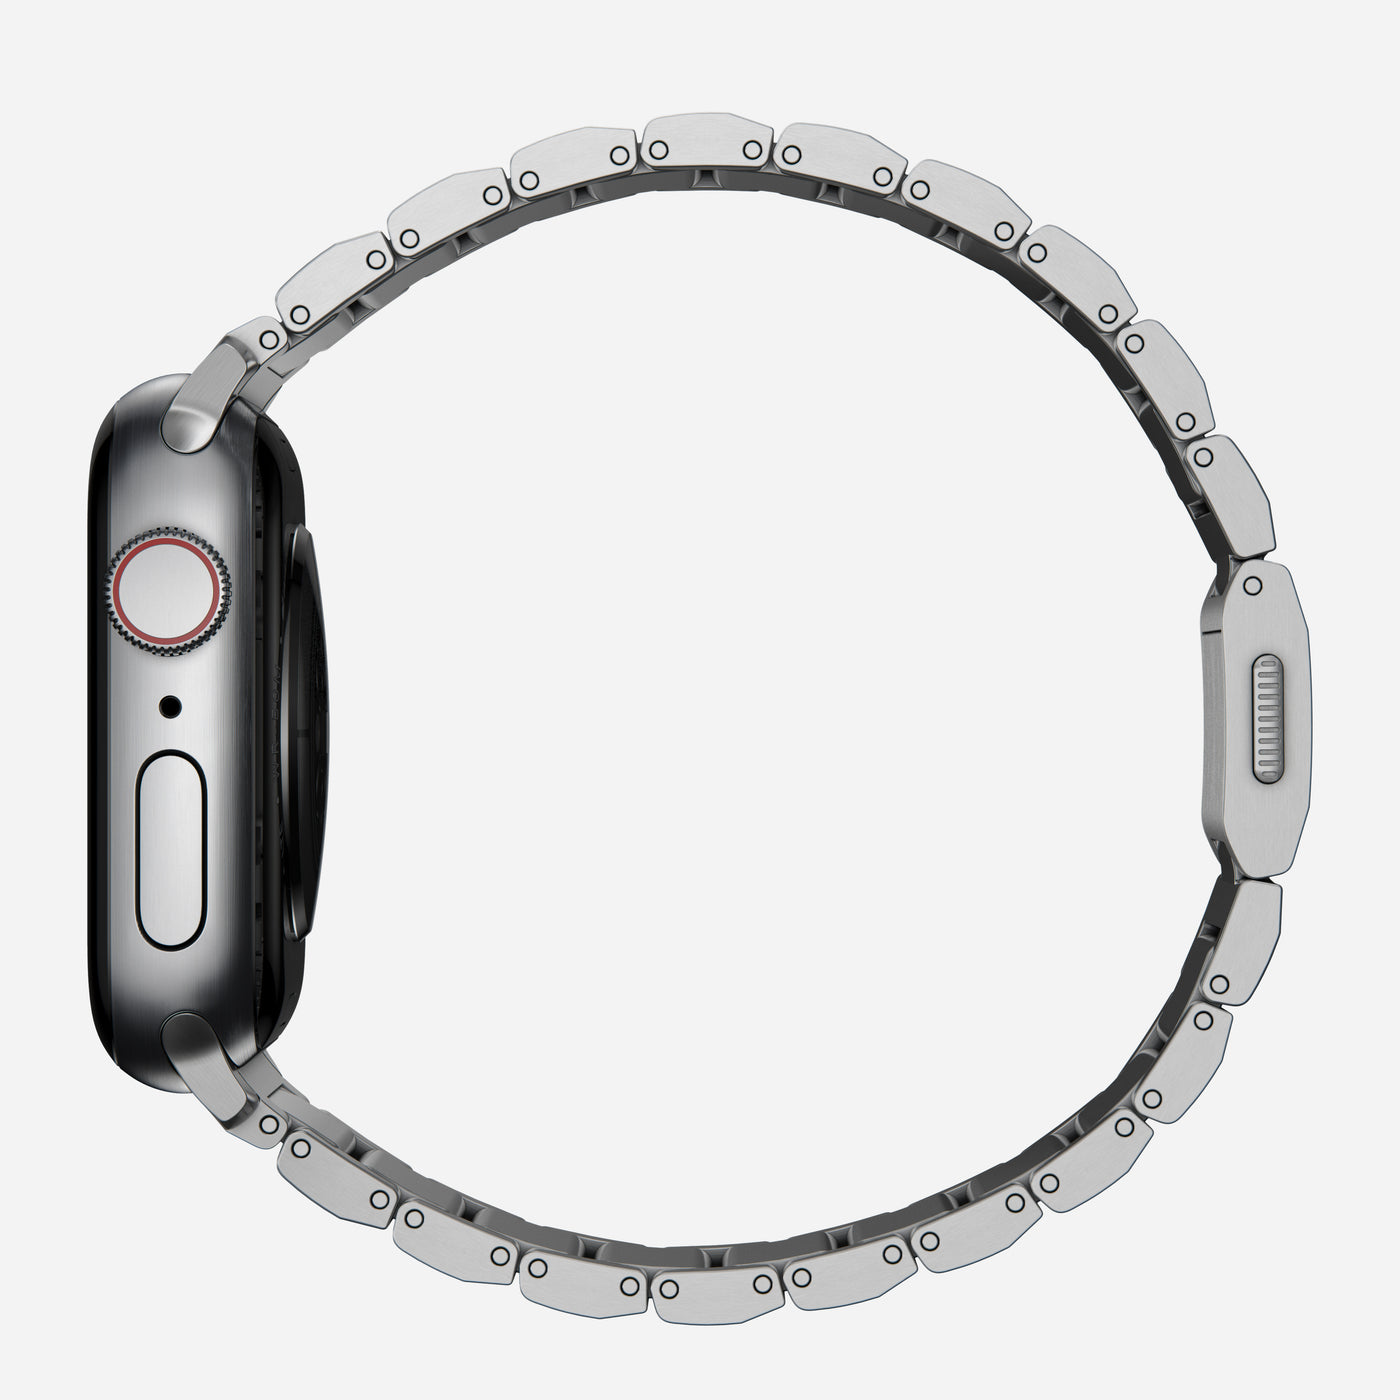 Titanium Band V2 for Apple Watch